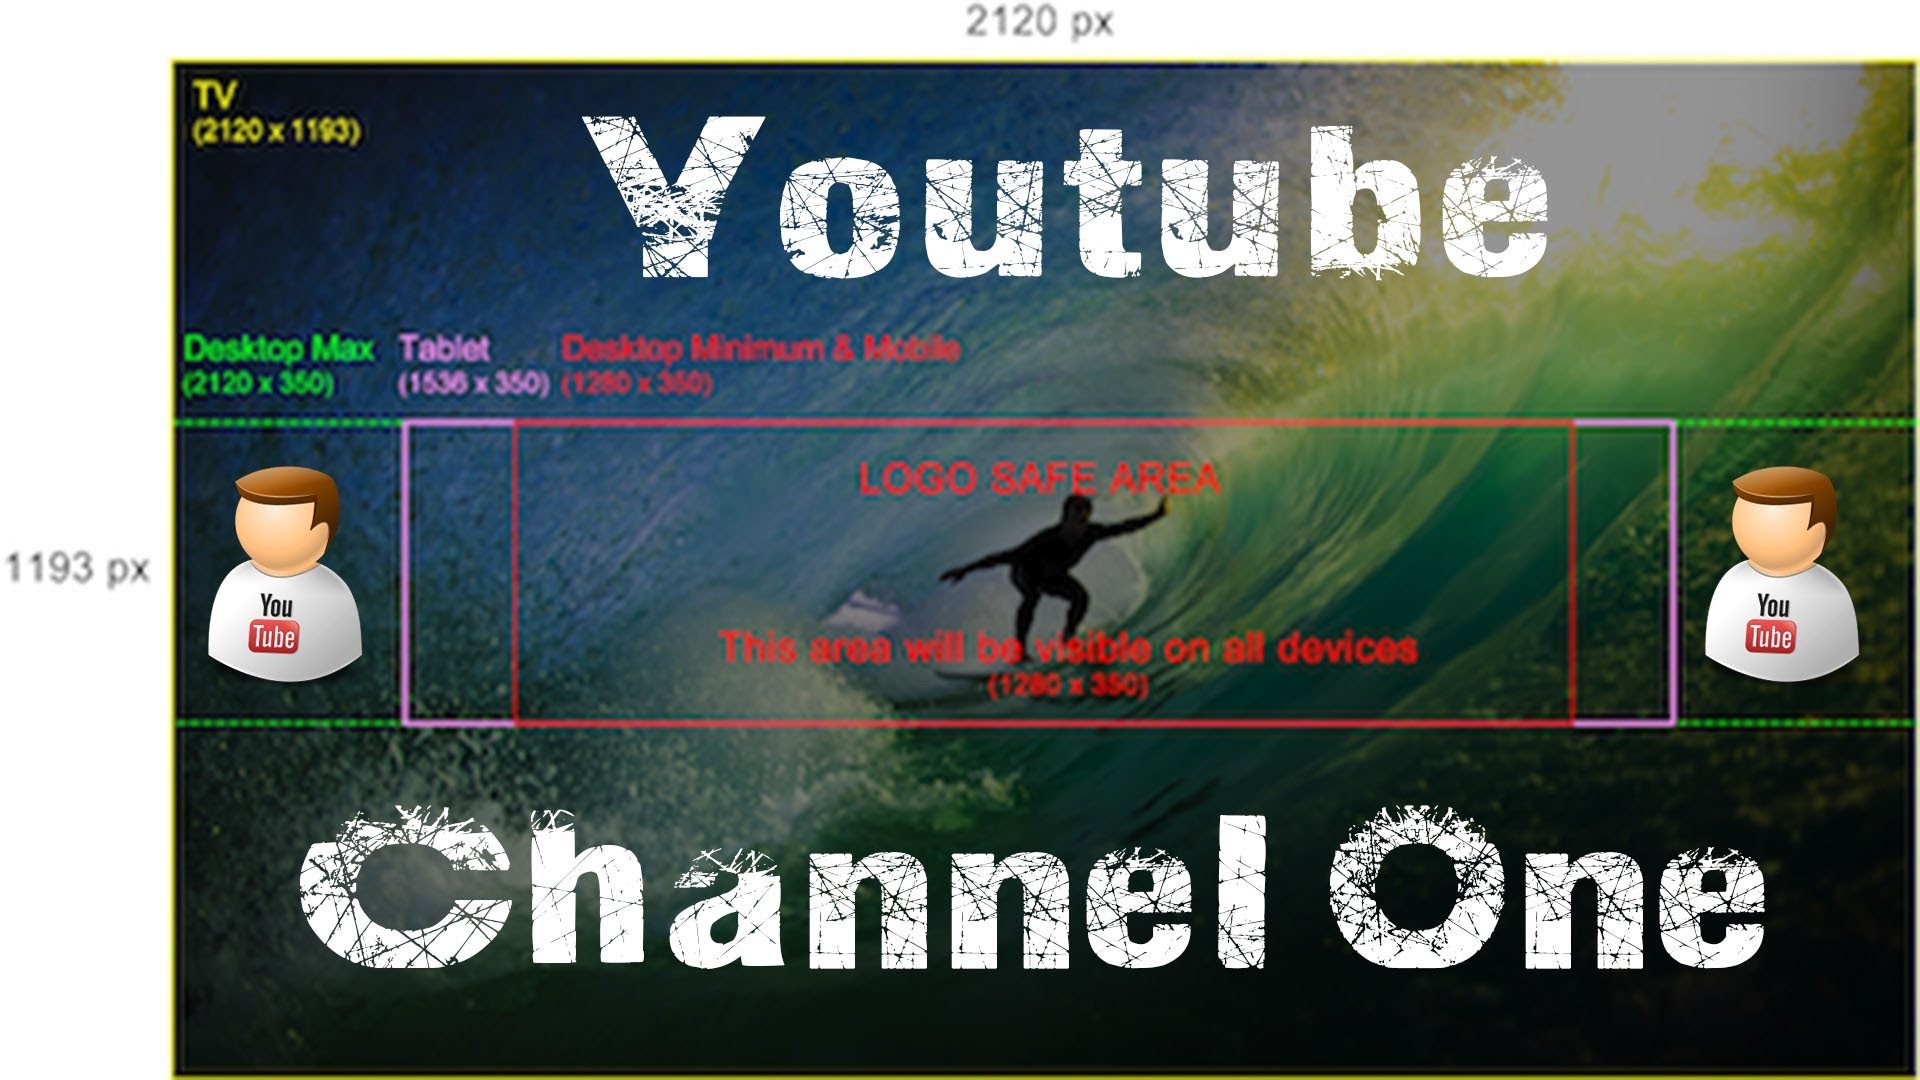 1920x1080 How To Create Channel Art For The New Youtube One Channel Layout - YouTube